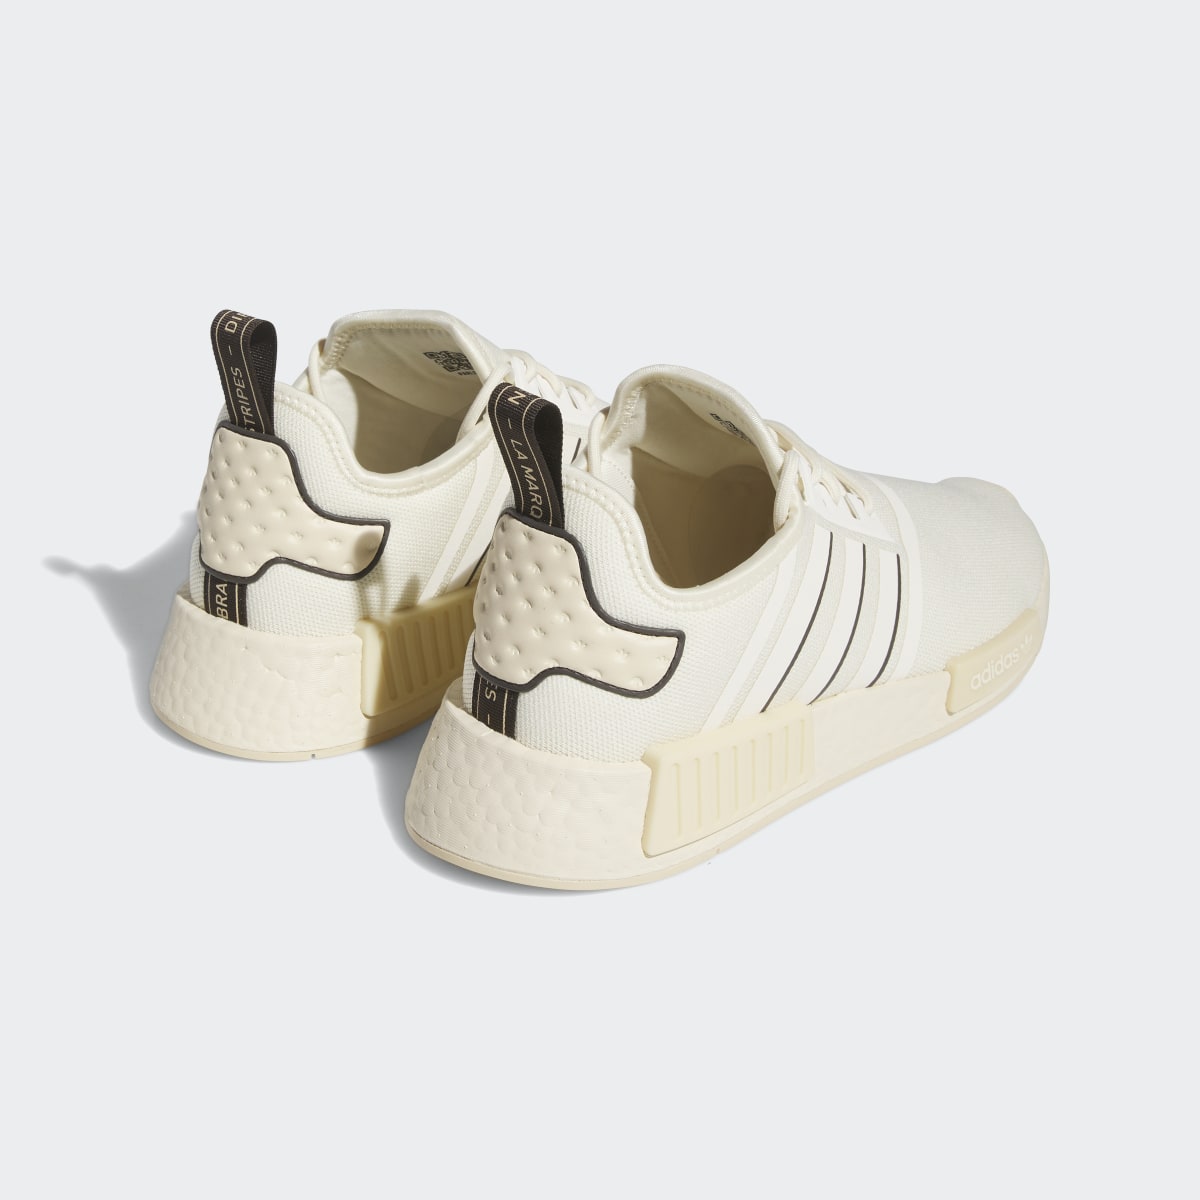 Adidas NMD_R1 Low Trainers. 6